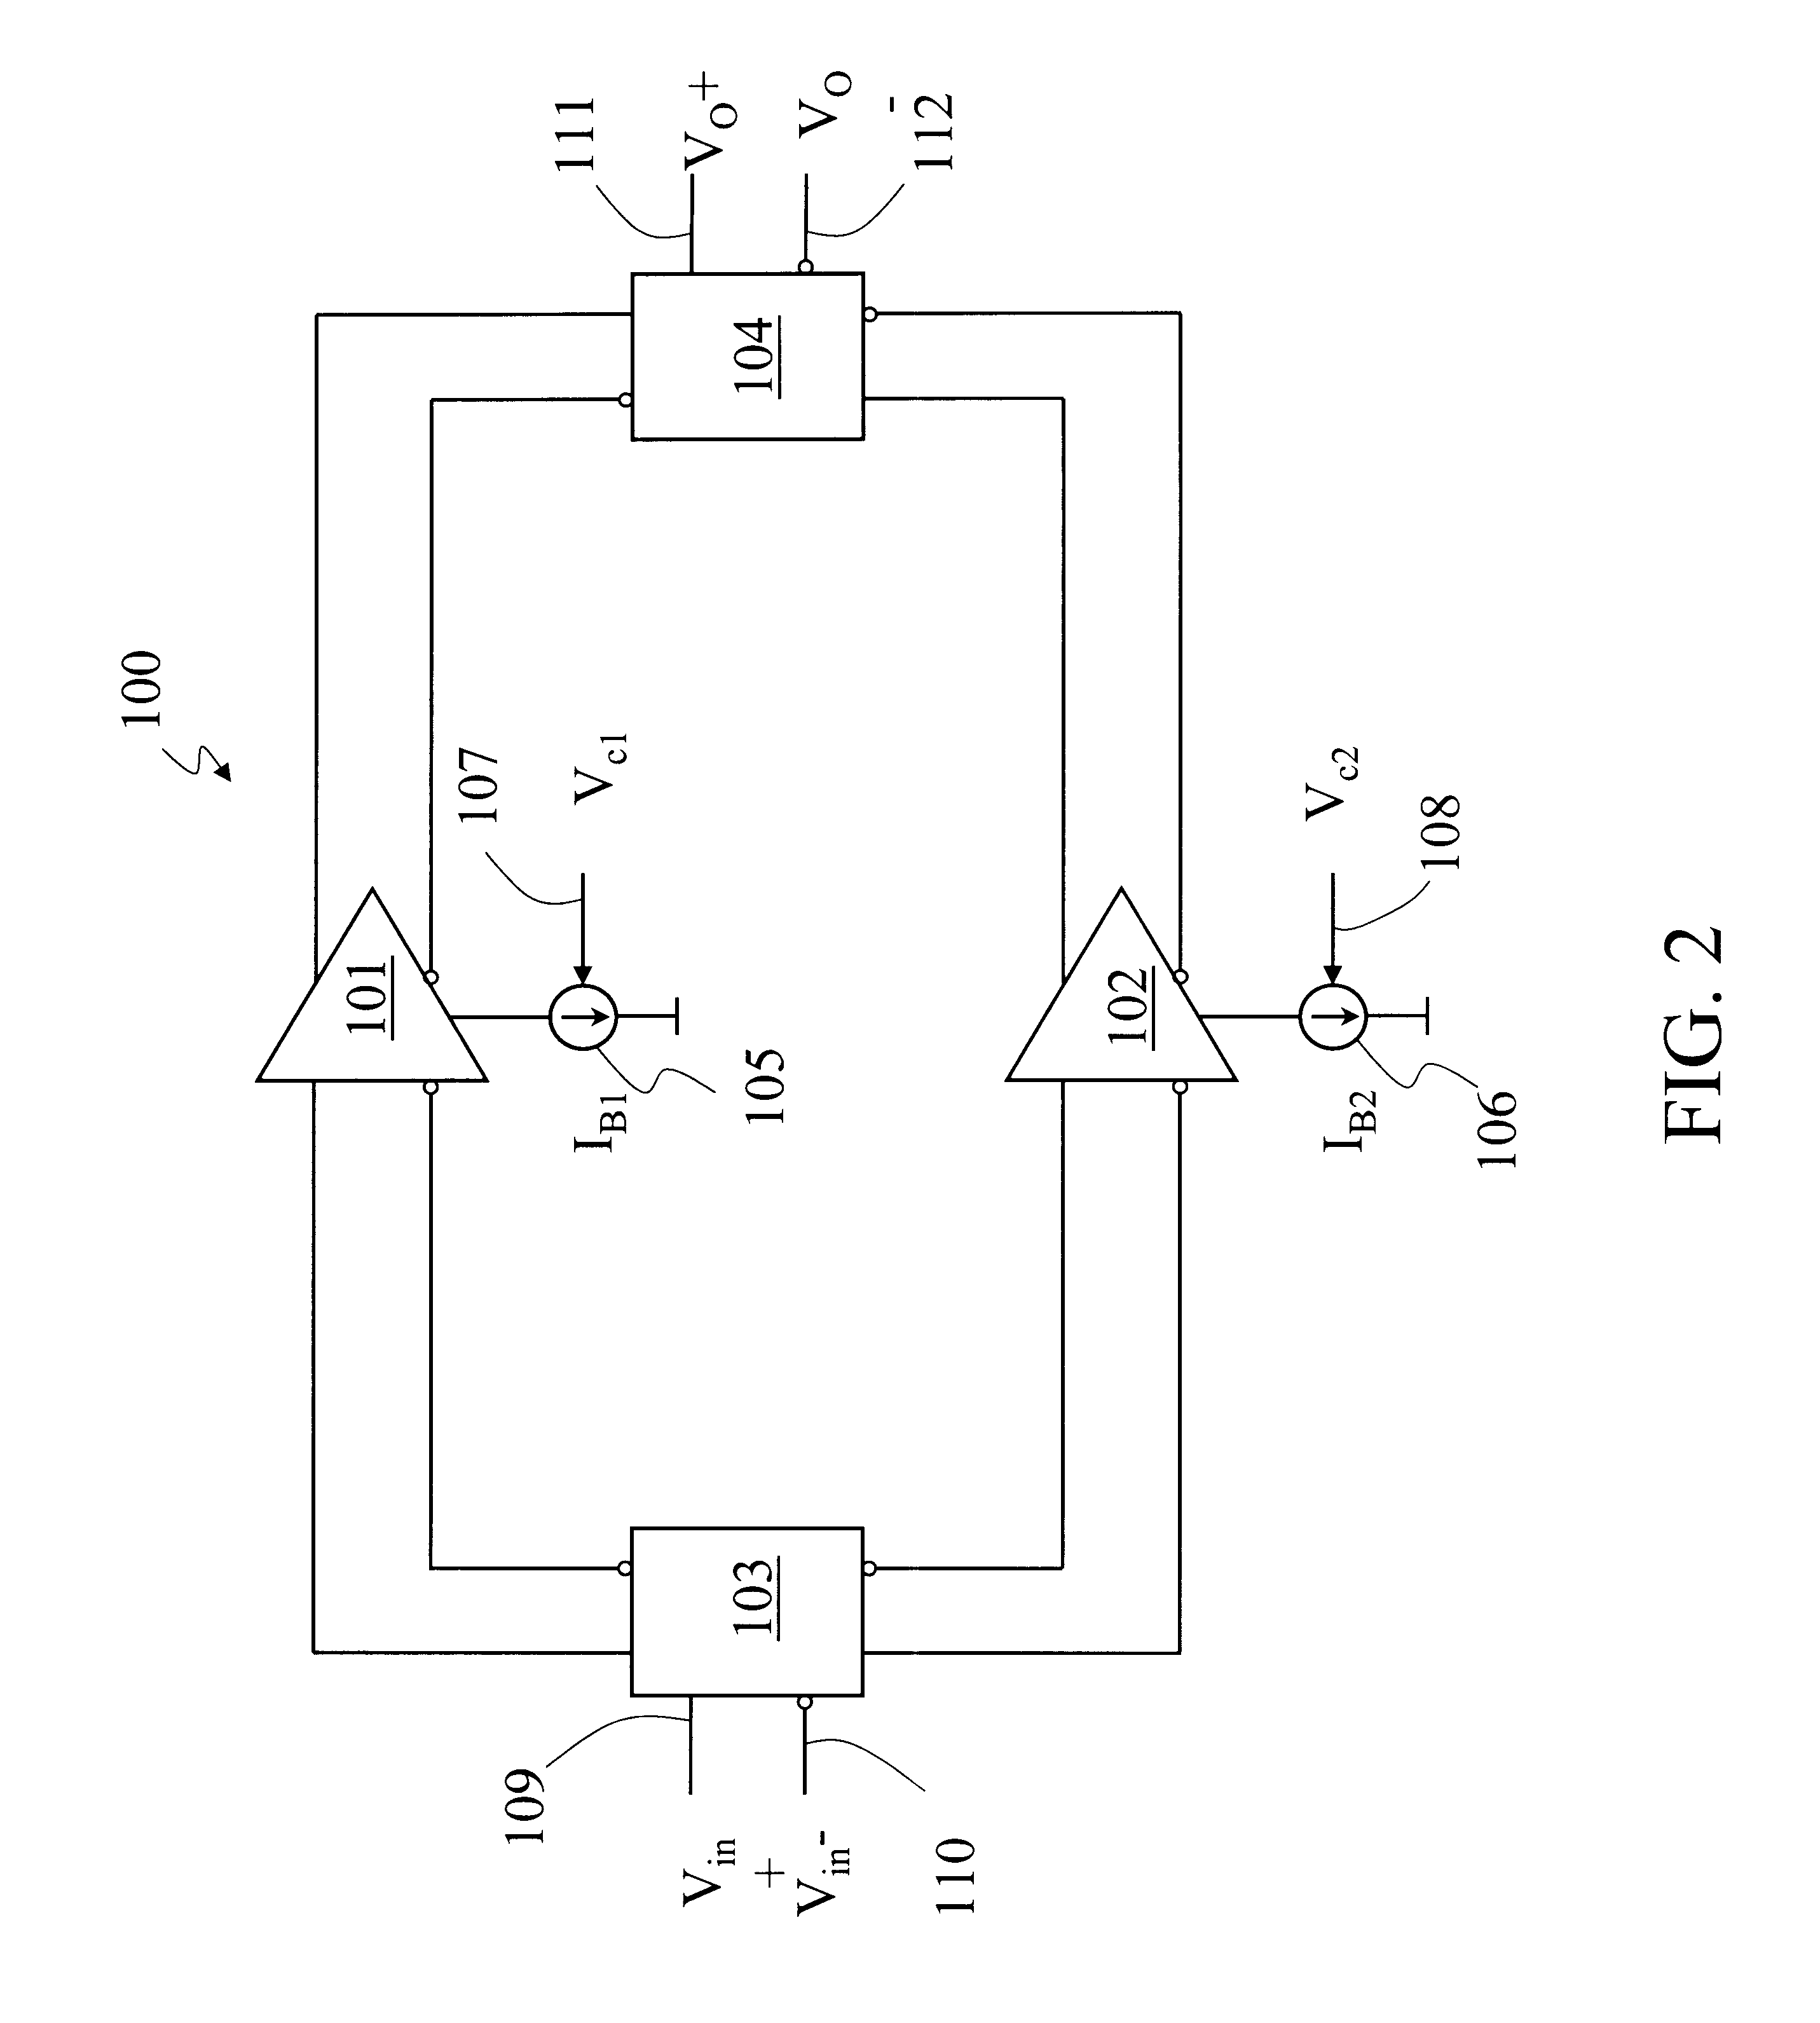 Wideband variable gain amplifier with low power supply voltage